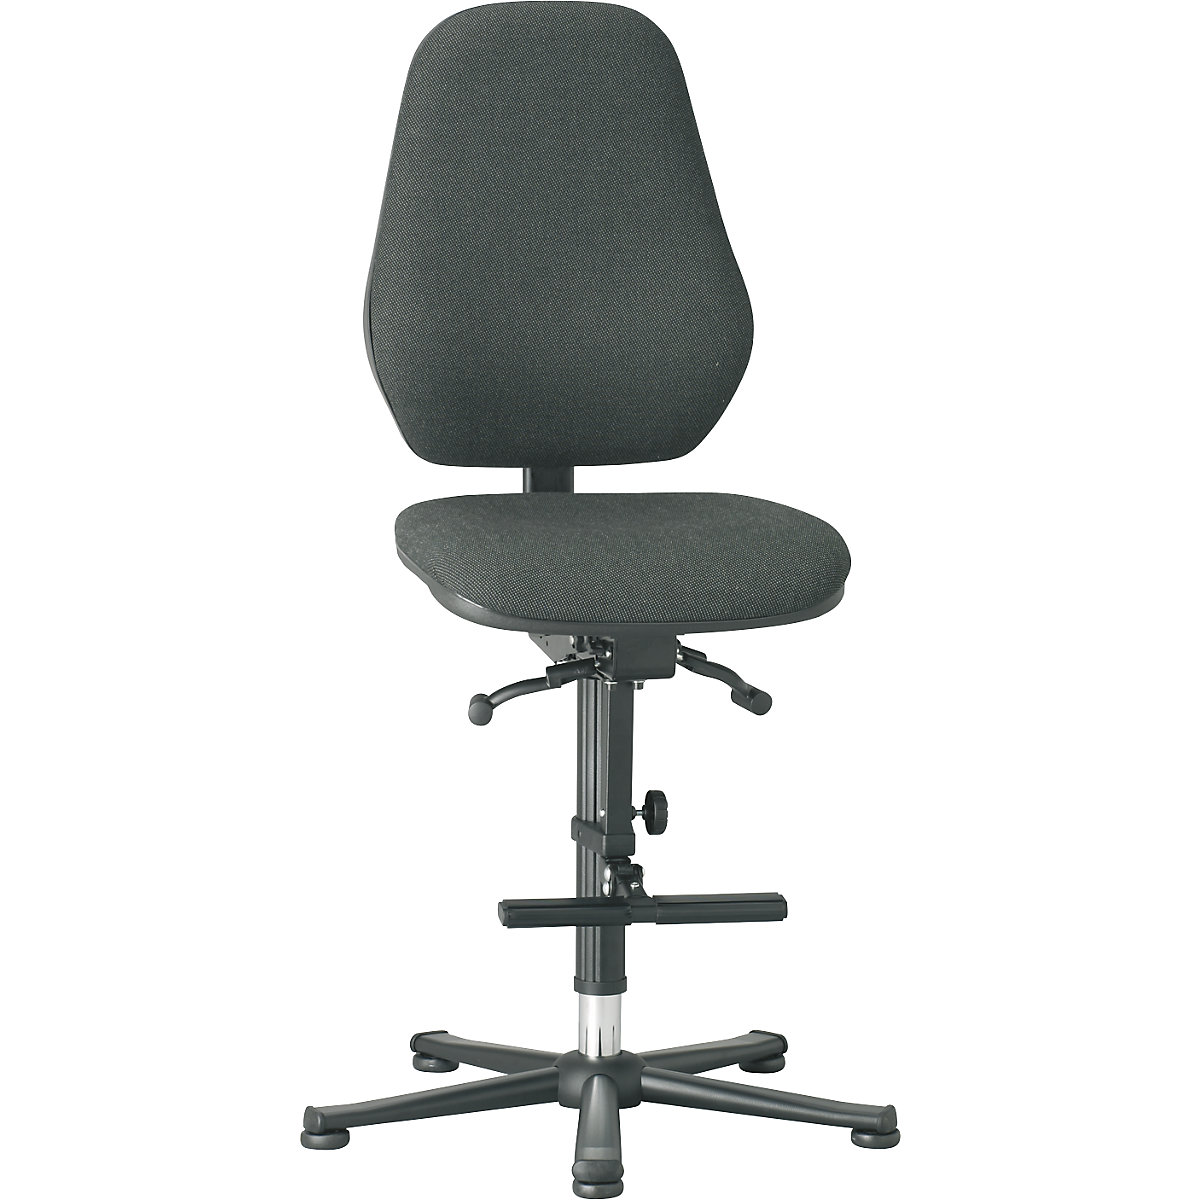 Industrial chair – bimos, synchronous mechanism, with floor glides and step, fabric covering-2